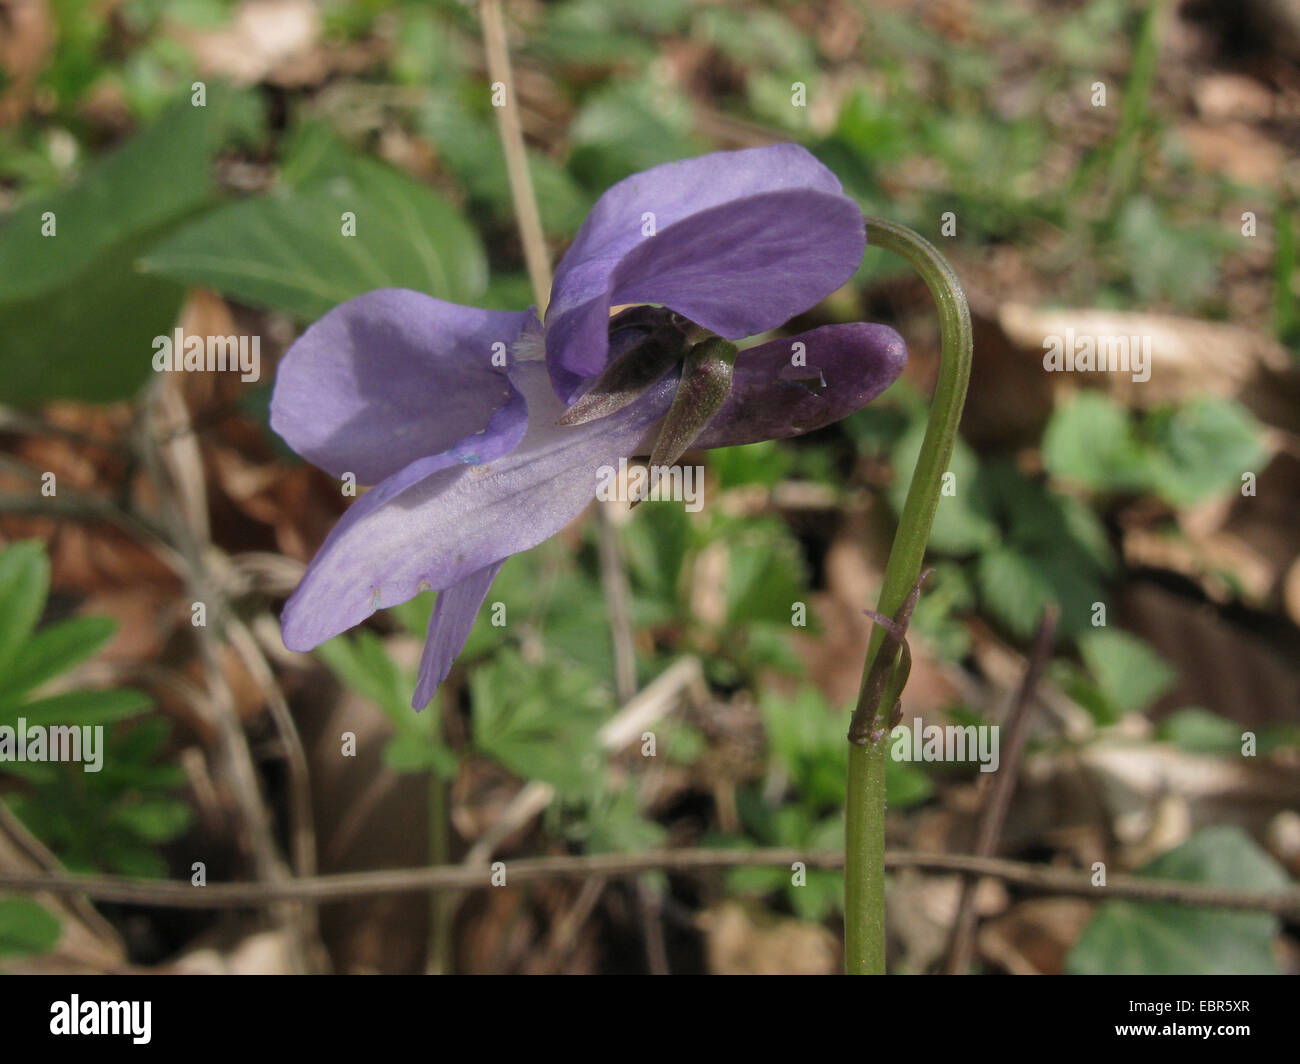 early dog-violet (Viola reichenbachiana), blooming, Germany, Lower Saxony Stock Photo